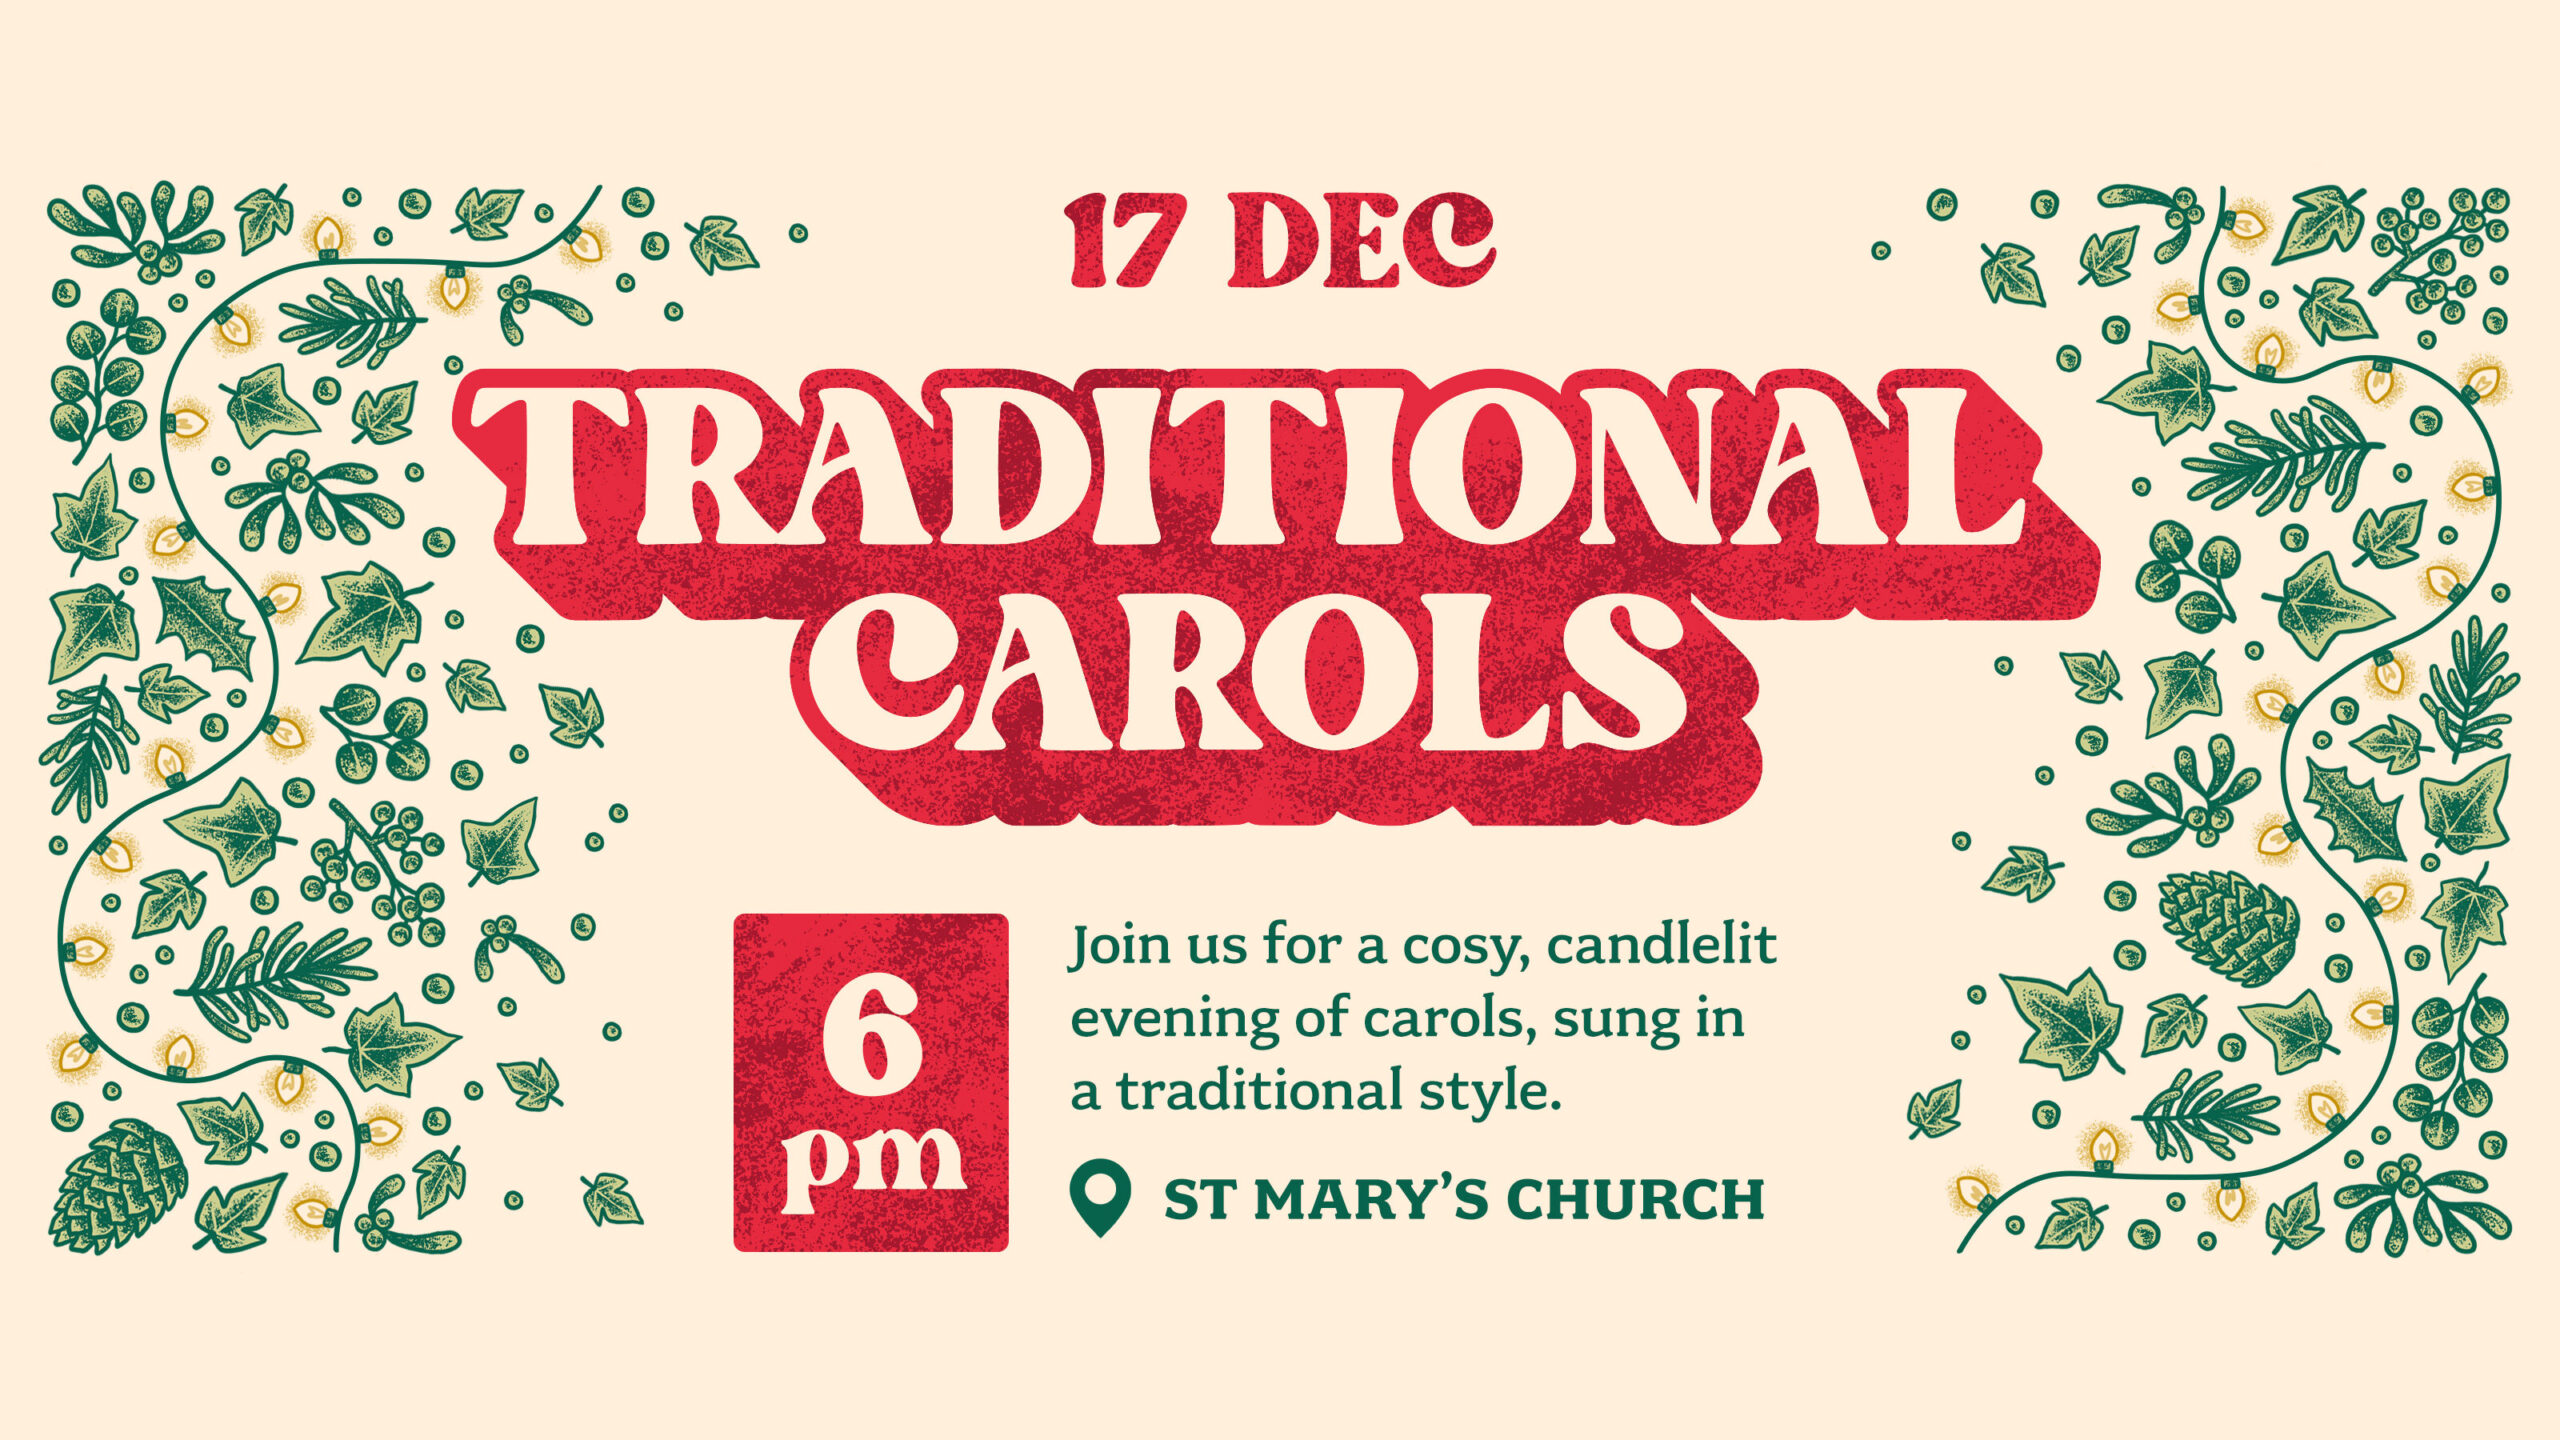 17 Dec, 6pm
Traditional Carols
Join us for a cosy, candlelit evening of carols, sung in a traditional style
St Mary's Church